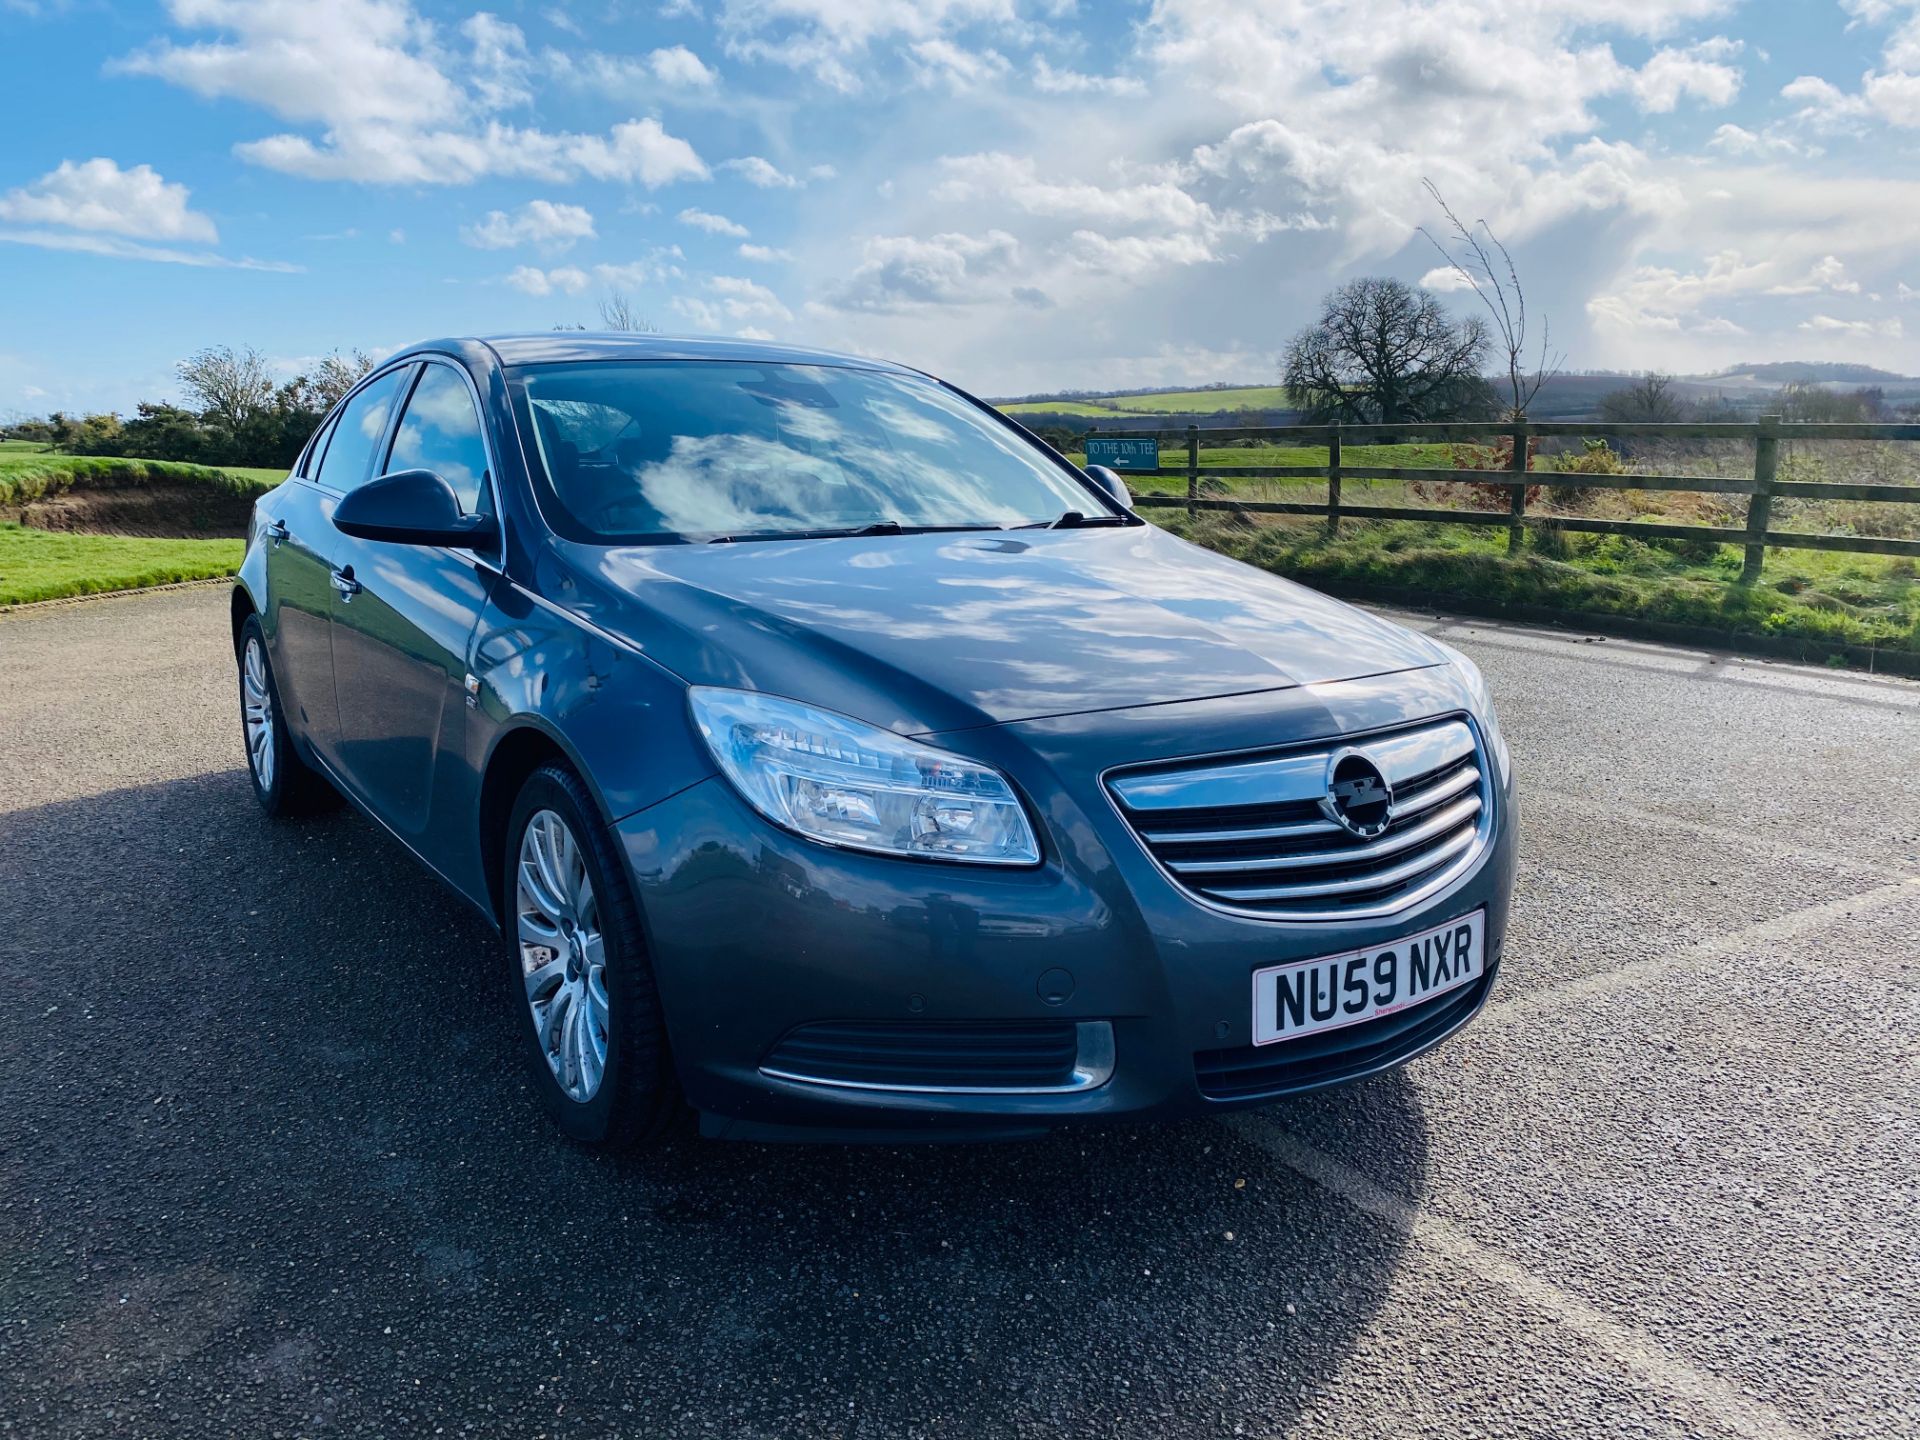 (ON SALE) VAUXHALL INSIGNIA 2.0CDTI "SE" 5 DOOR HATCHBACK - LEATHER - AIR CON - LOW MILES - NO VAT - Image 3 of 30